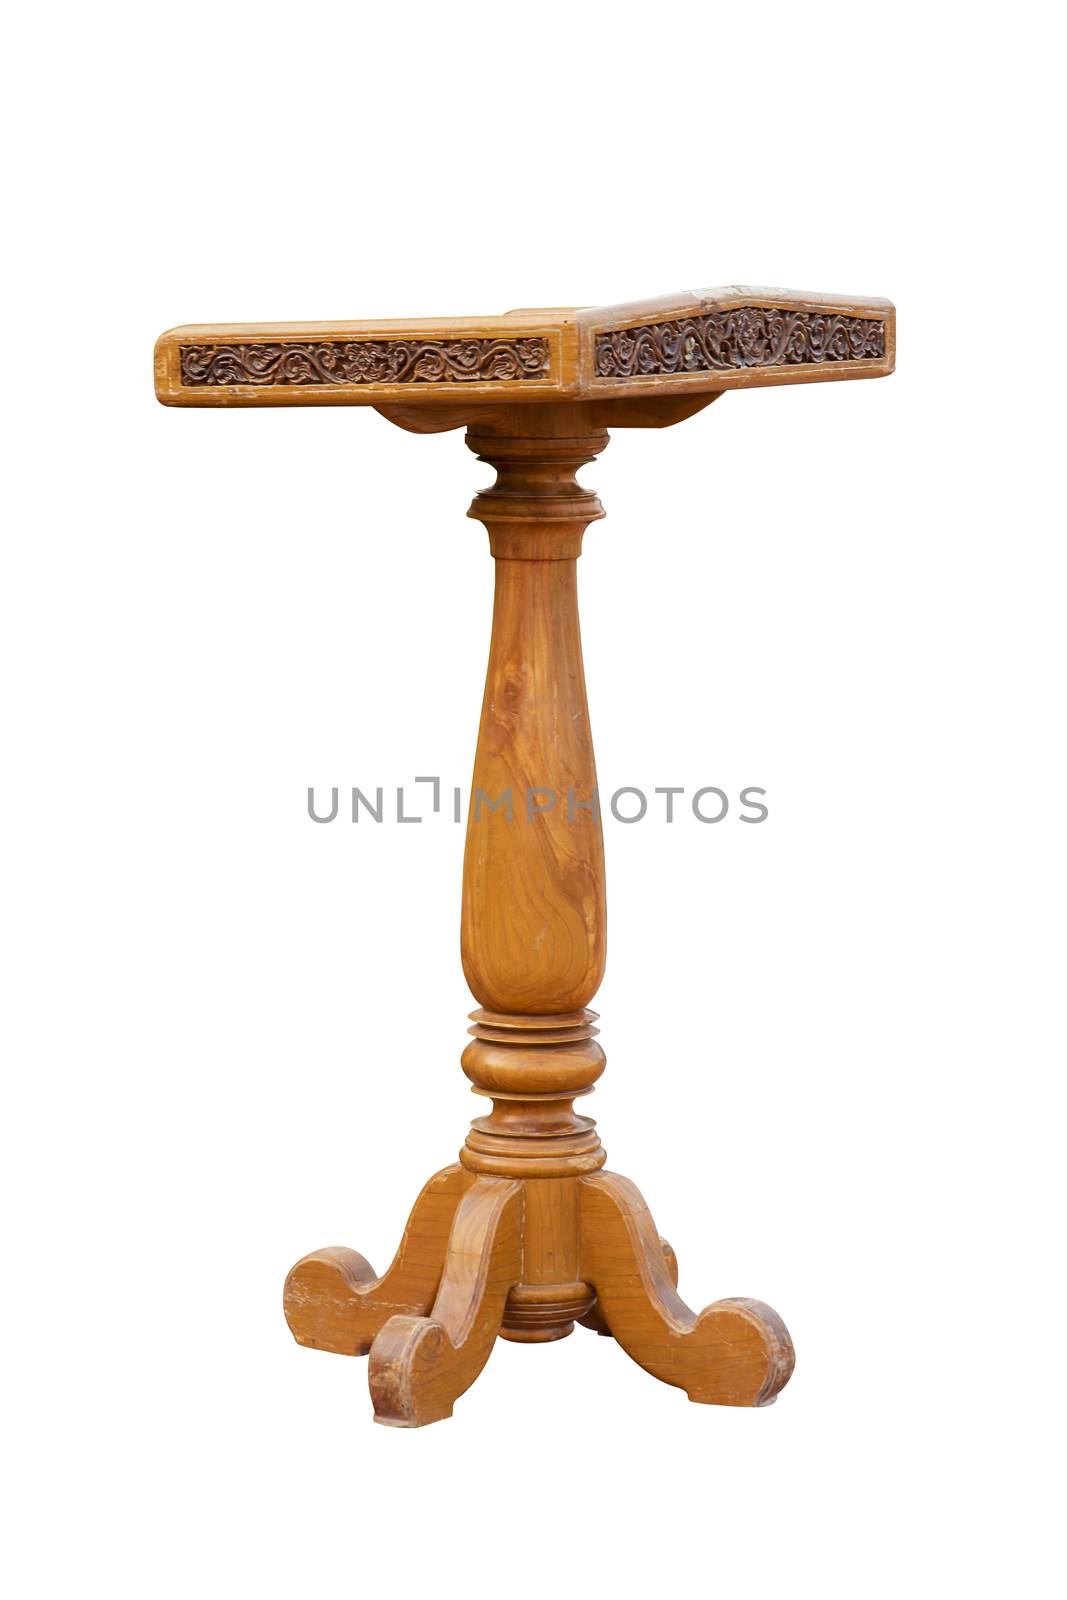 Wooden Podium Tribune Rostrum Stand Isolated on White Background, Work with clipping path.